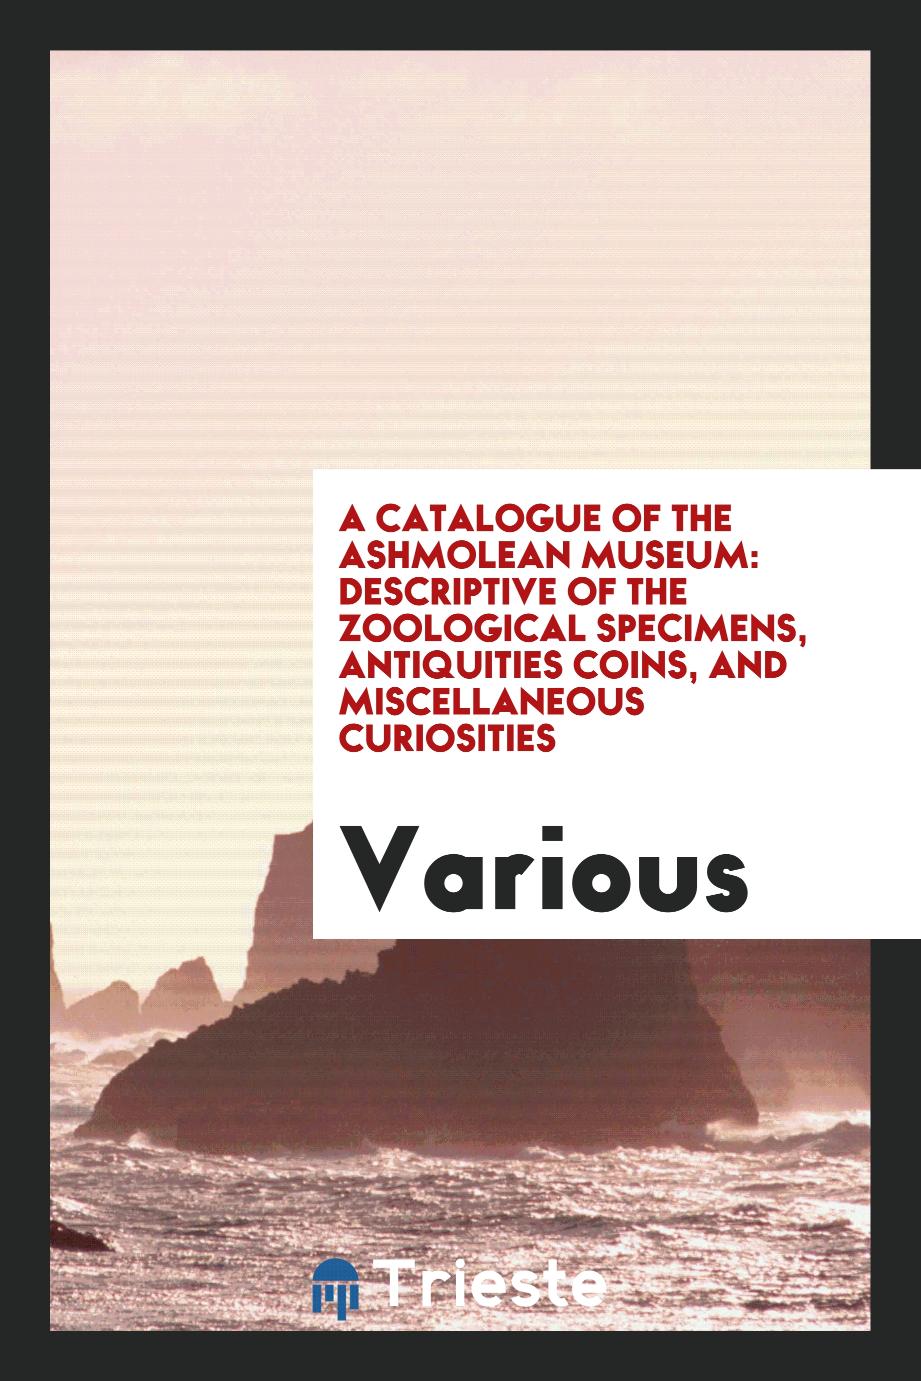 A Catalogue of the Ashmolean Museum: Descriptive of the Zoological Specimens, Antiquities Coins, and Miscellaneous Curiosities